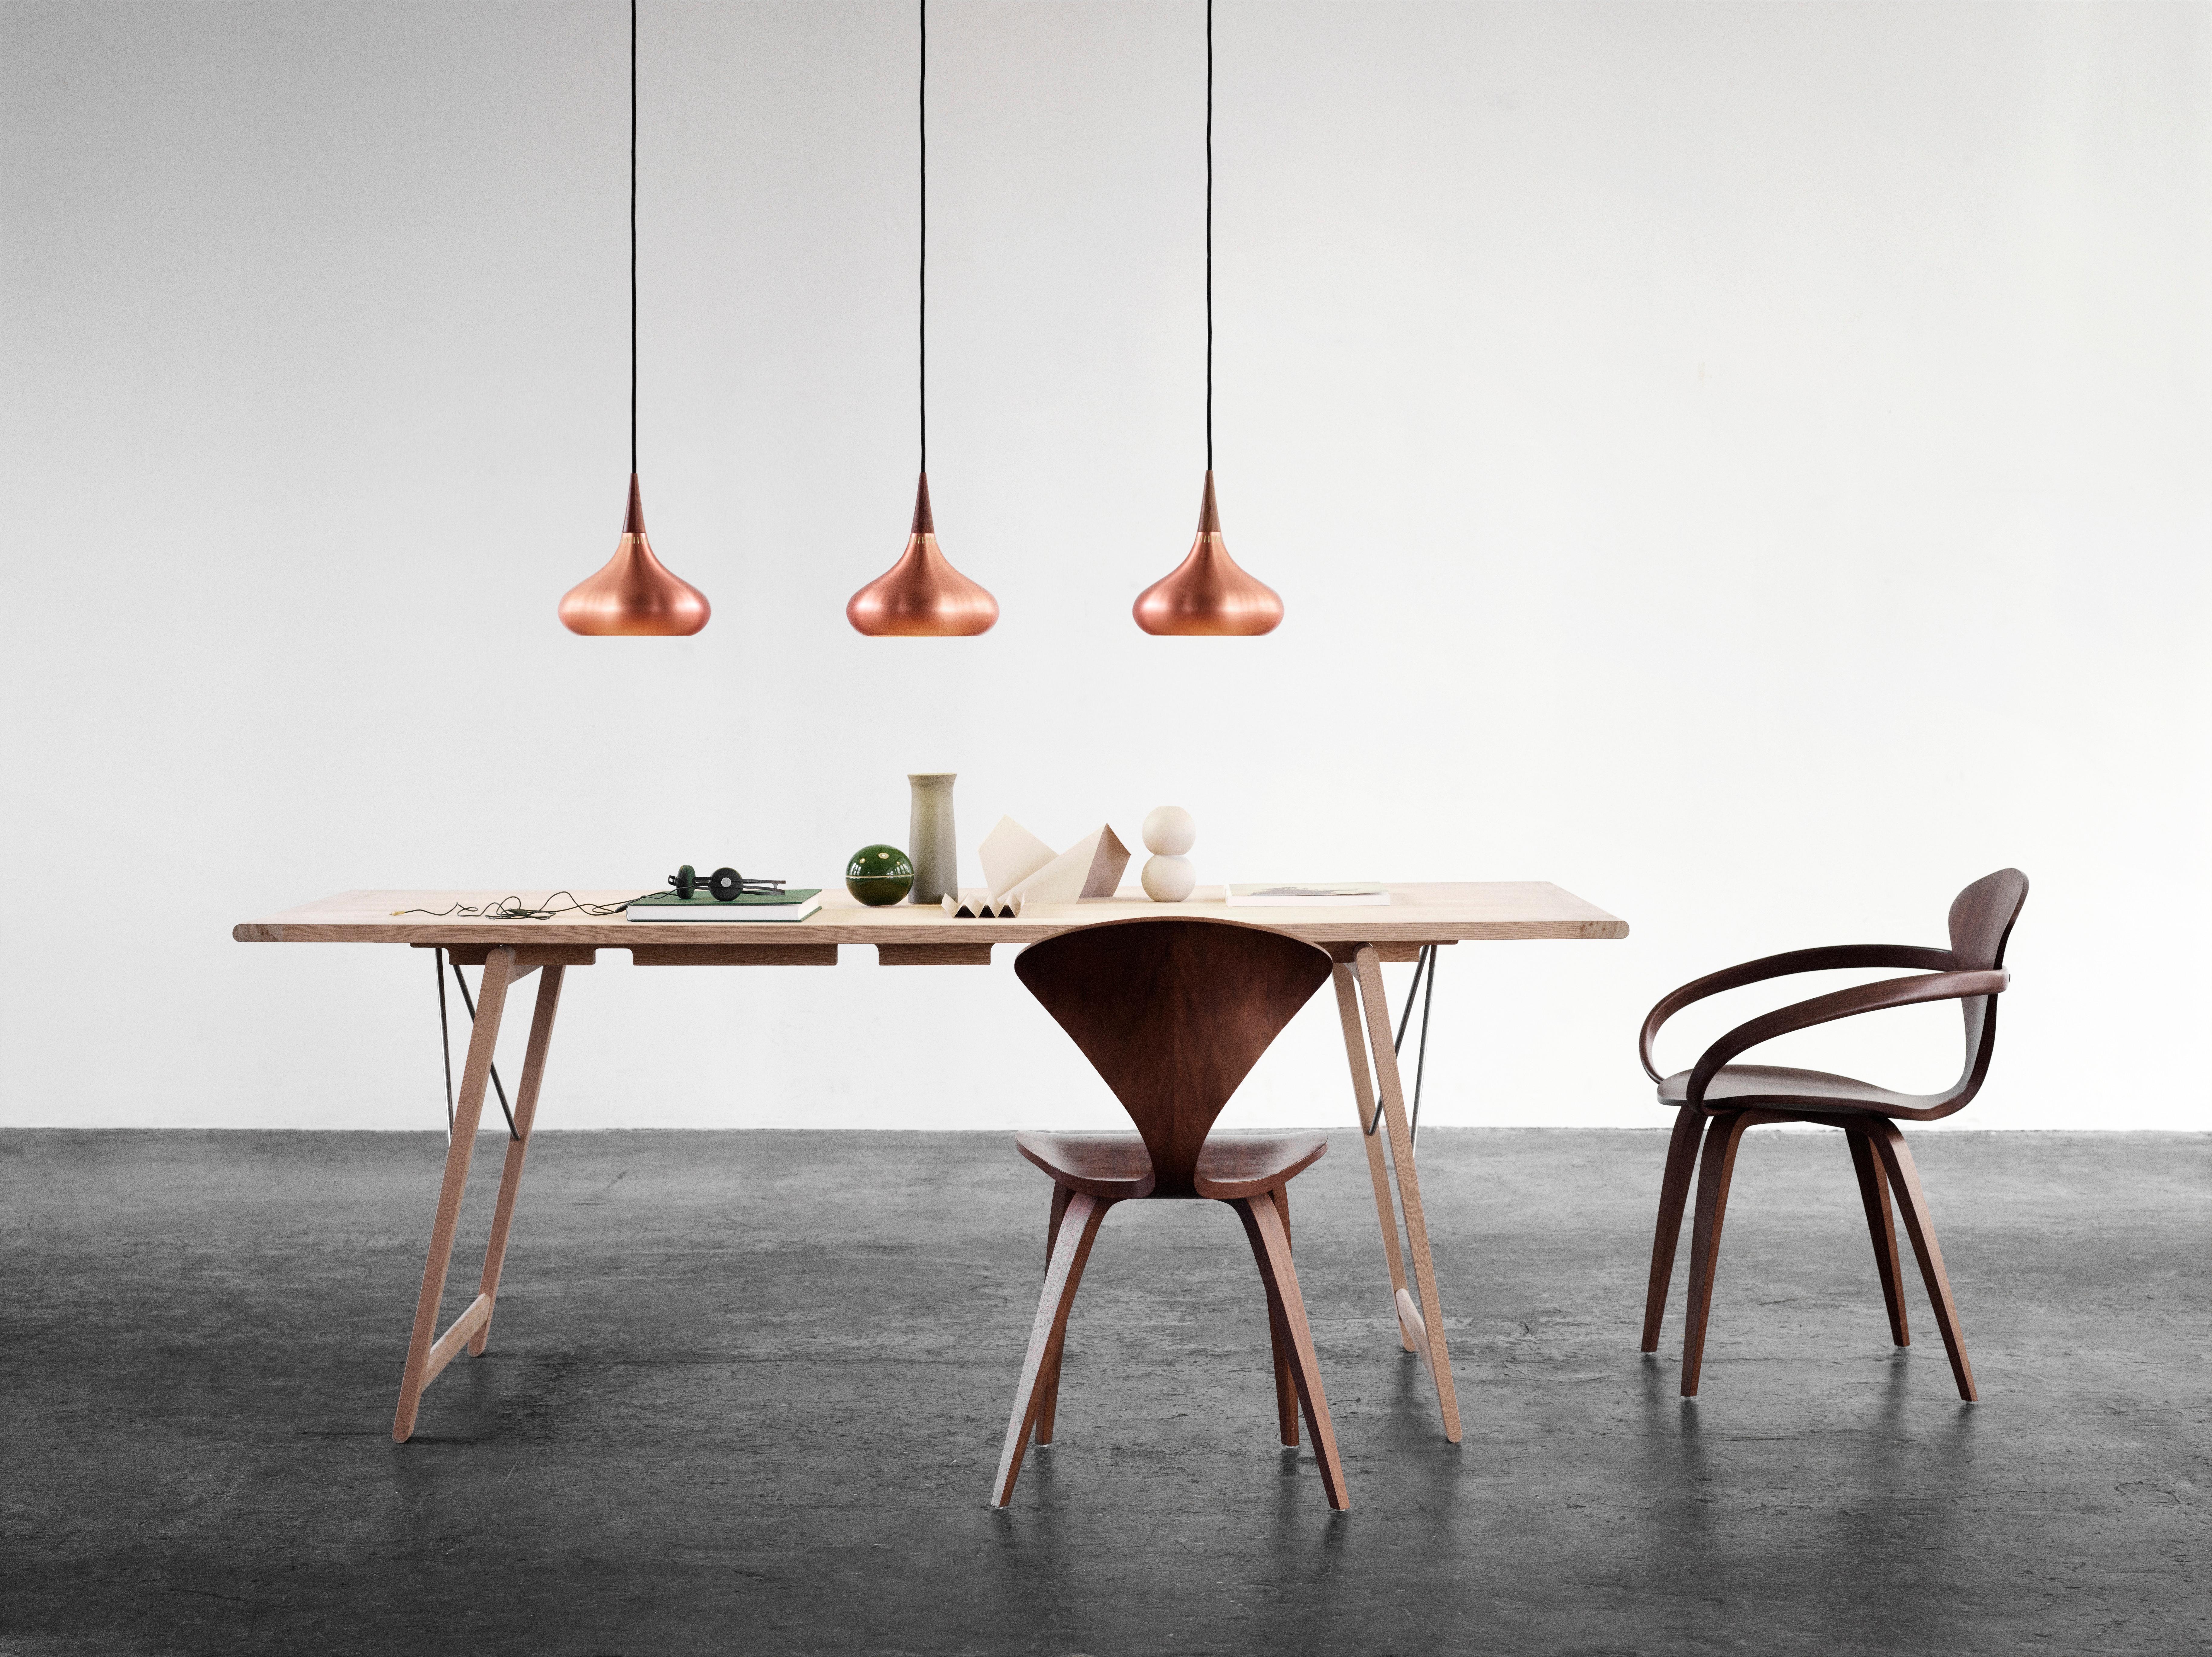 Small Jo Hammerborg 'Orient' Pendant Lamp for Fritz Hansen in Copper and Rosewood.

Established in 1872, Fritz Hansen has become synonymous with legendary Danish design. Combining timeless craftsmanship with an emphasis on sustainability, the